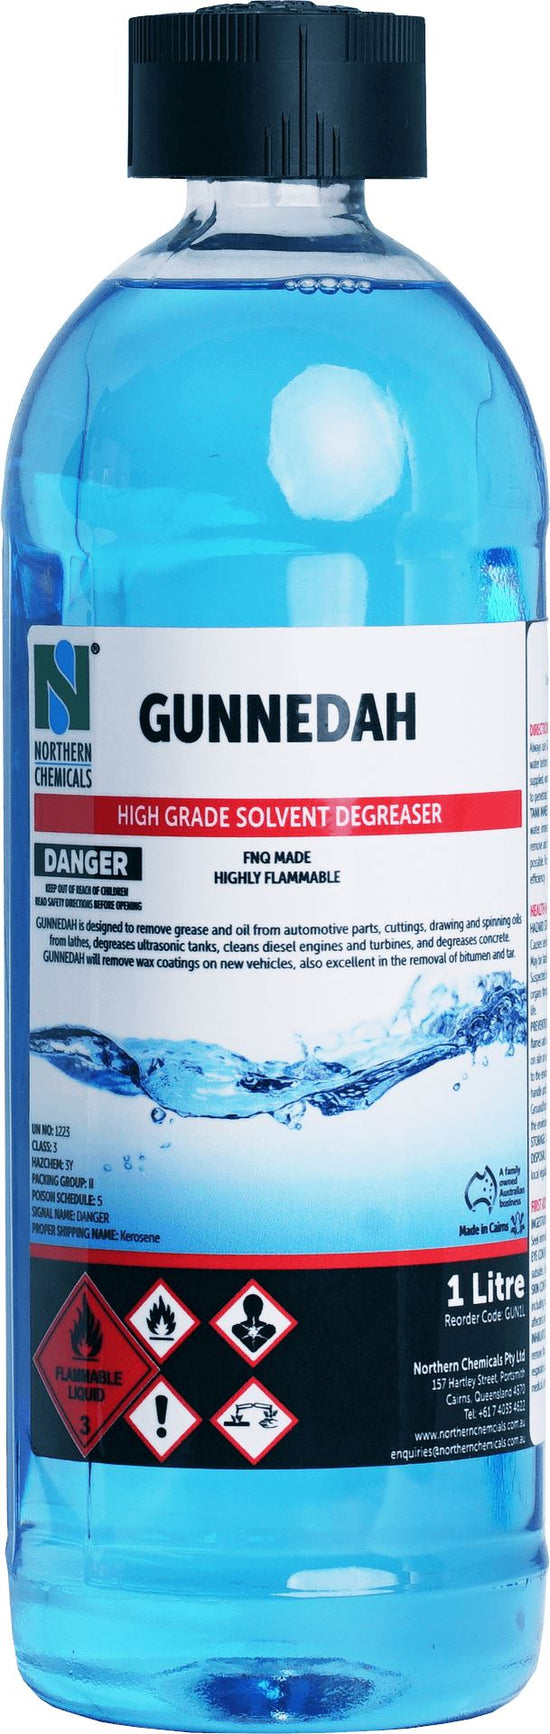 Gunnedah - Heavy Duty Solvent Degreaser Solvent Northern Chemicals 1L  (6687886966955)